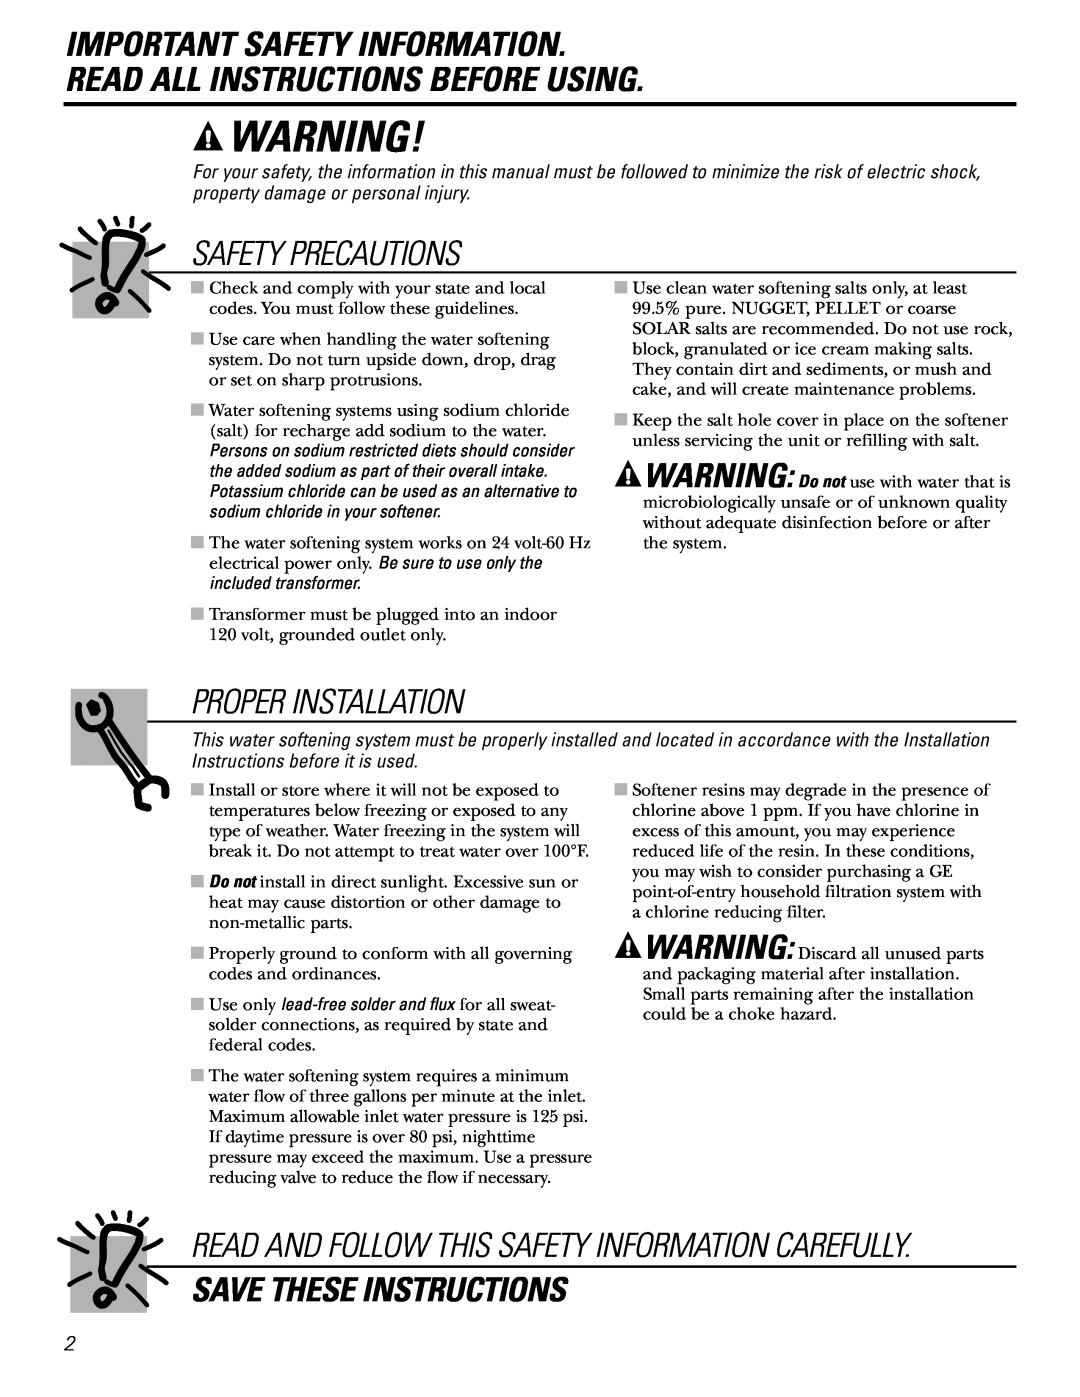 GE GXSF31E Important Safety Information Read All Instructions Before Using, Safety Precautions, Proper Installation 